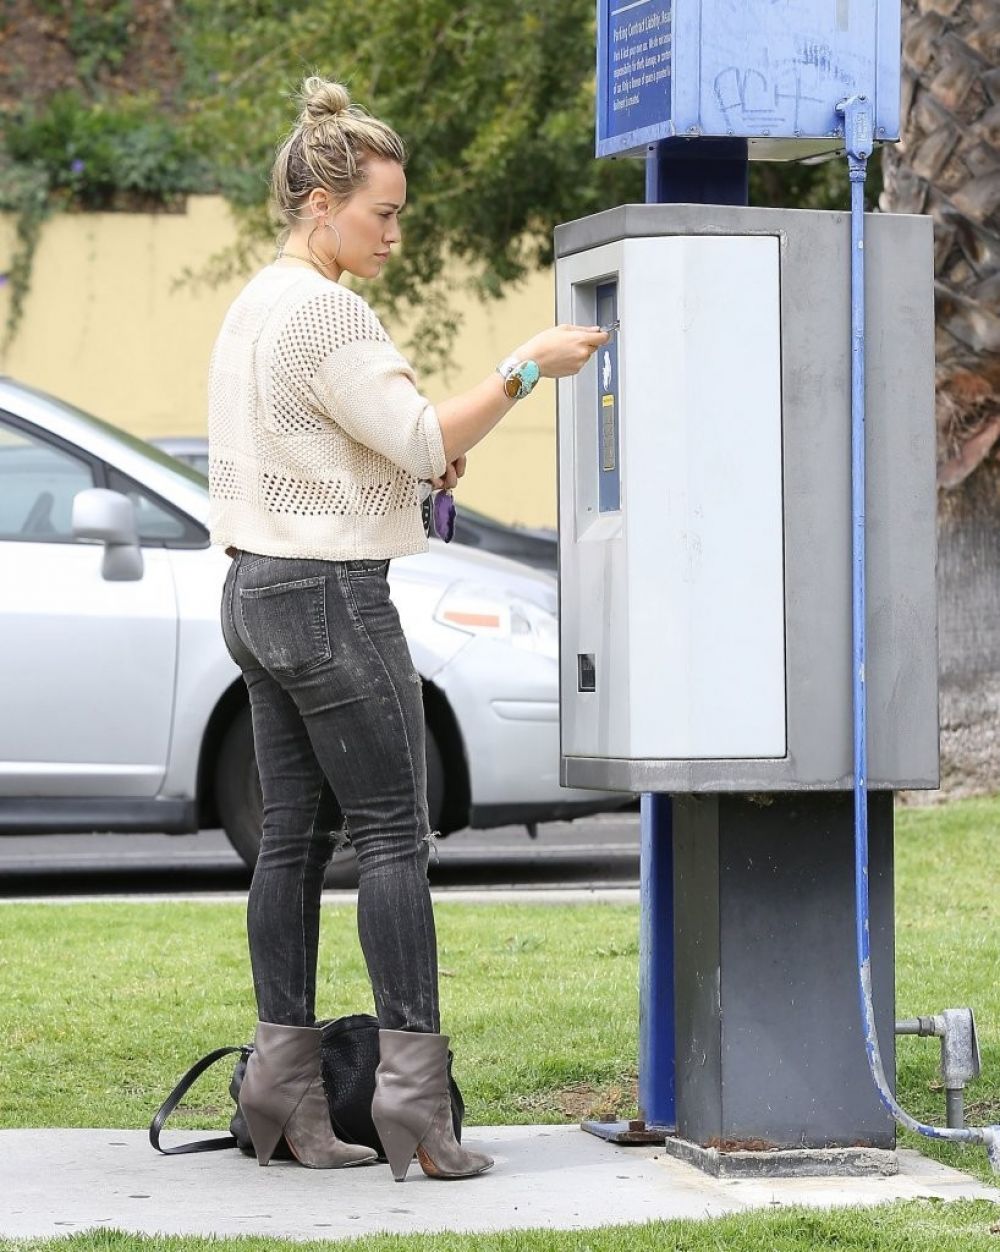 Hilary Duff Out West Hollywood